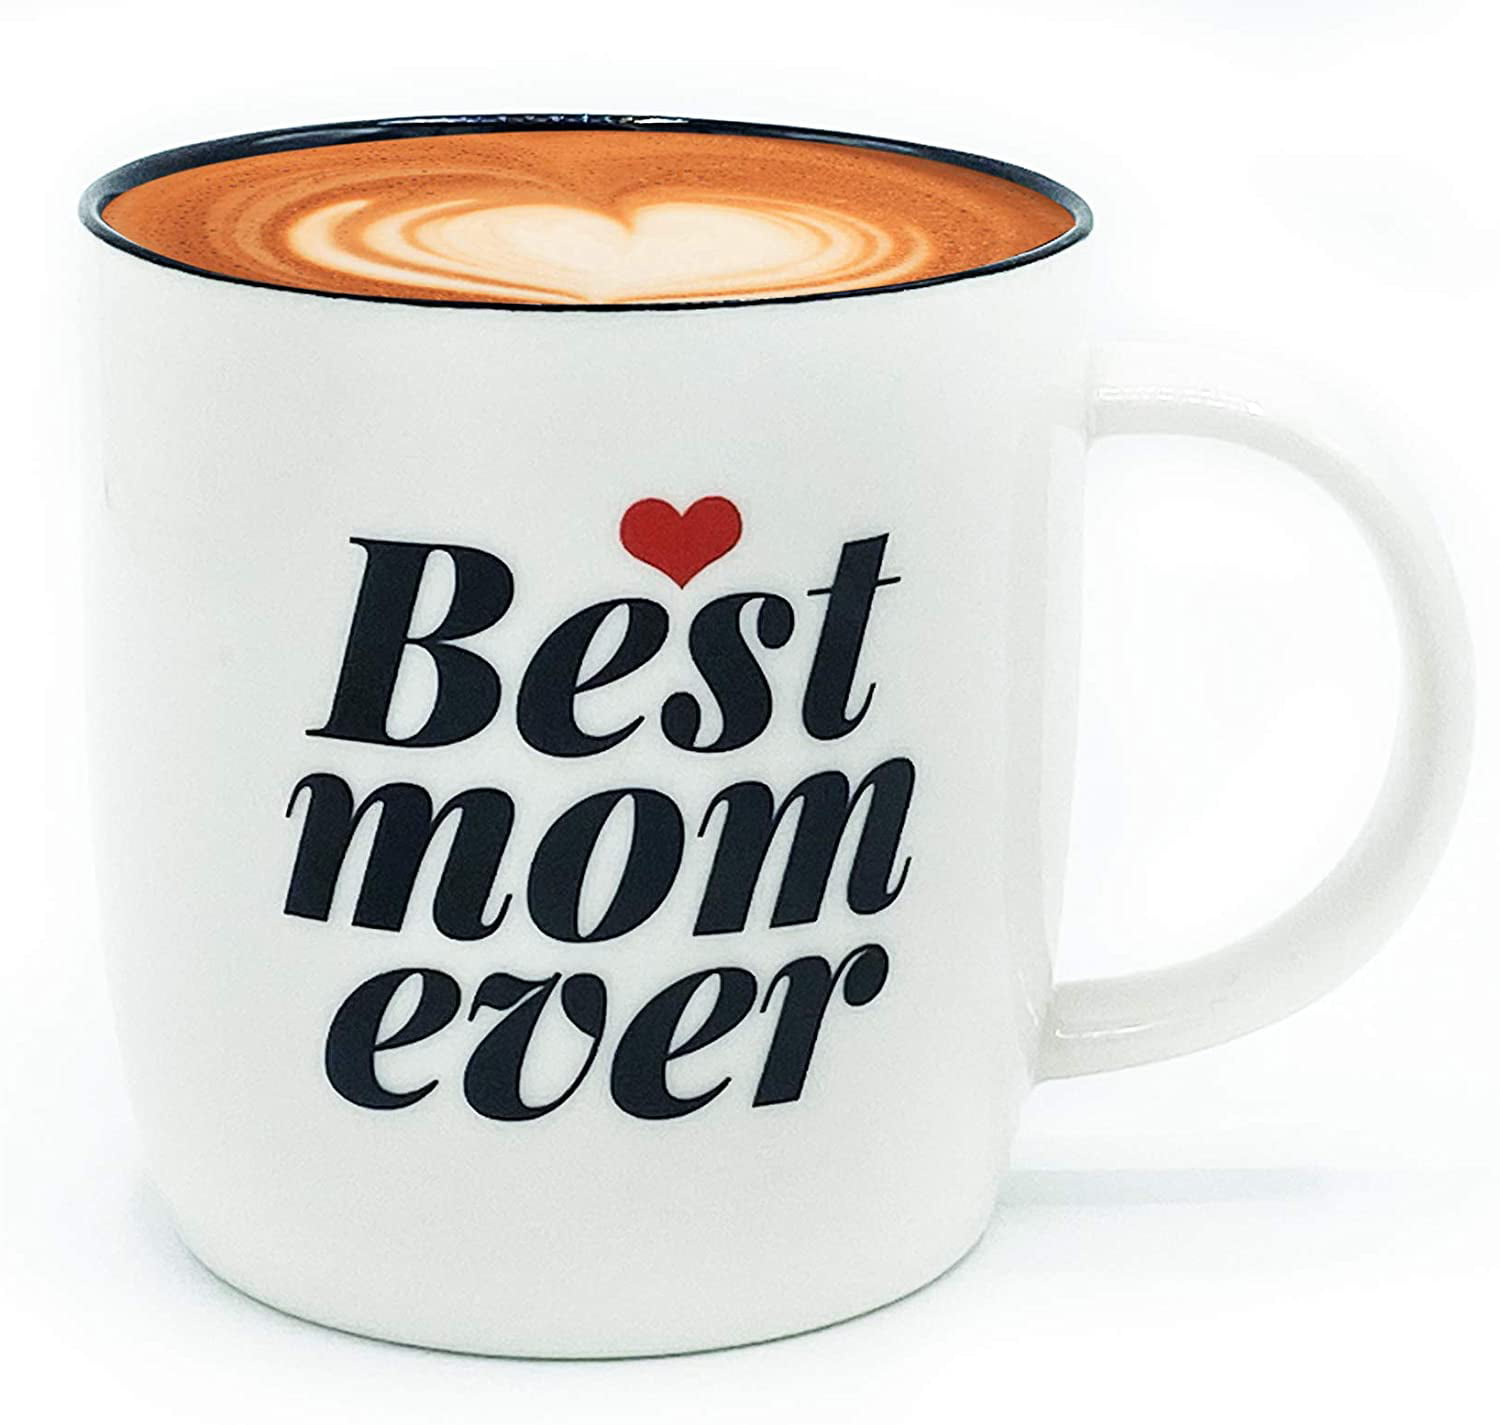 Triple Gifffted Worlds Best Mom Ever Coffee Mug, Great Birthday Gifts